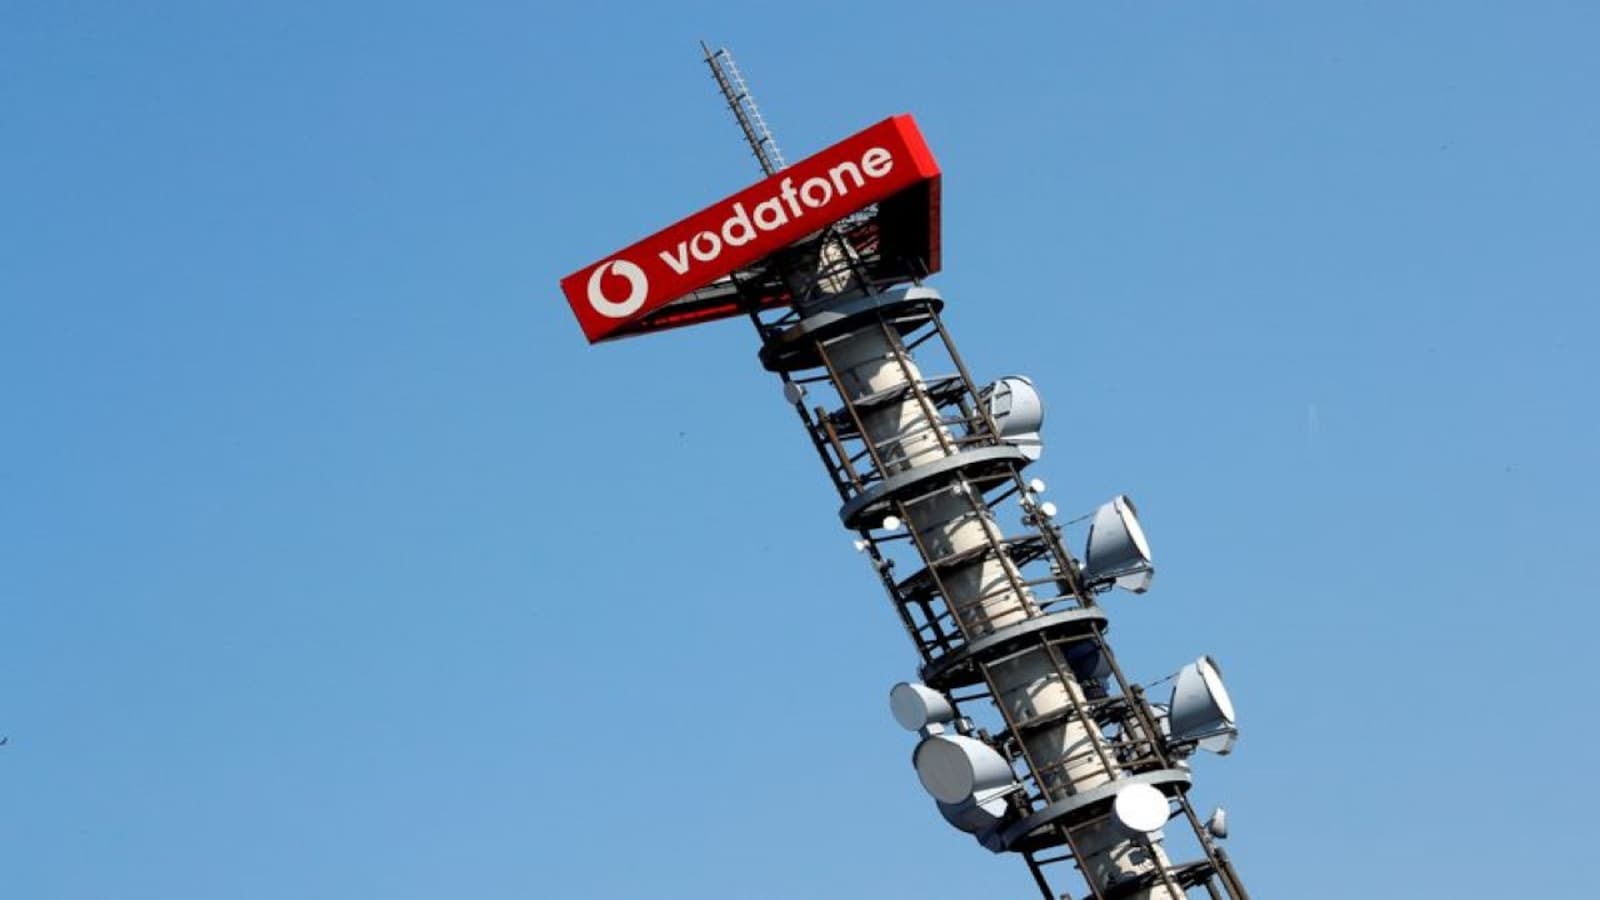 Empty coffers, fleeing users: Everything gets bad to worse for Vodafone Idea